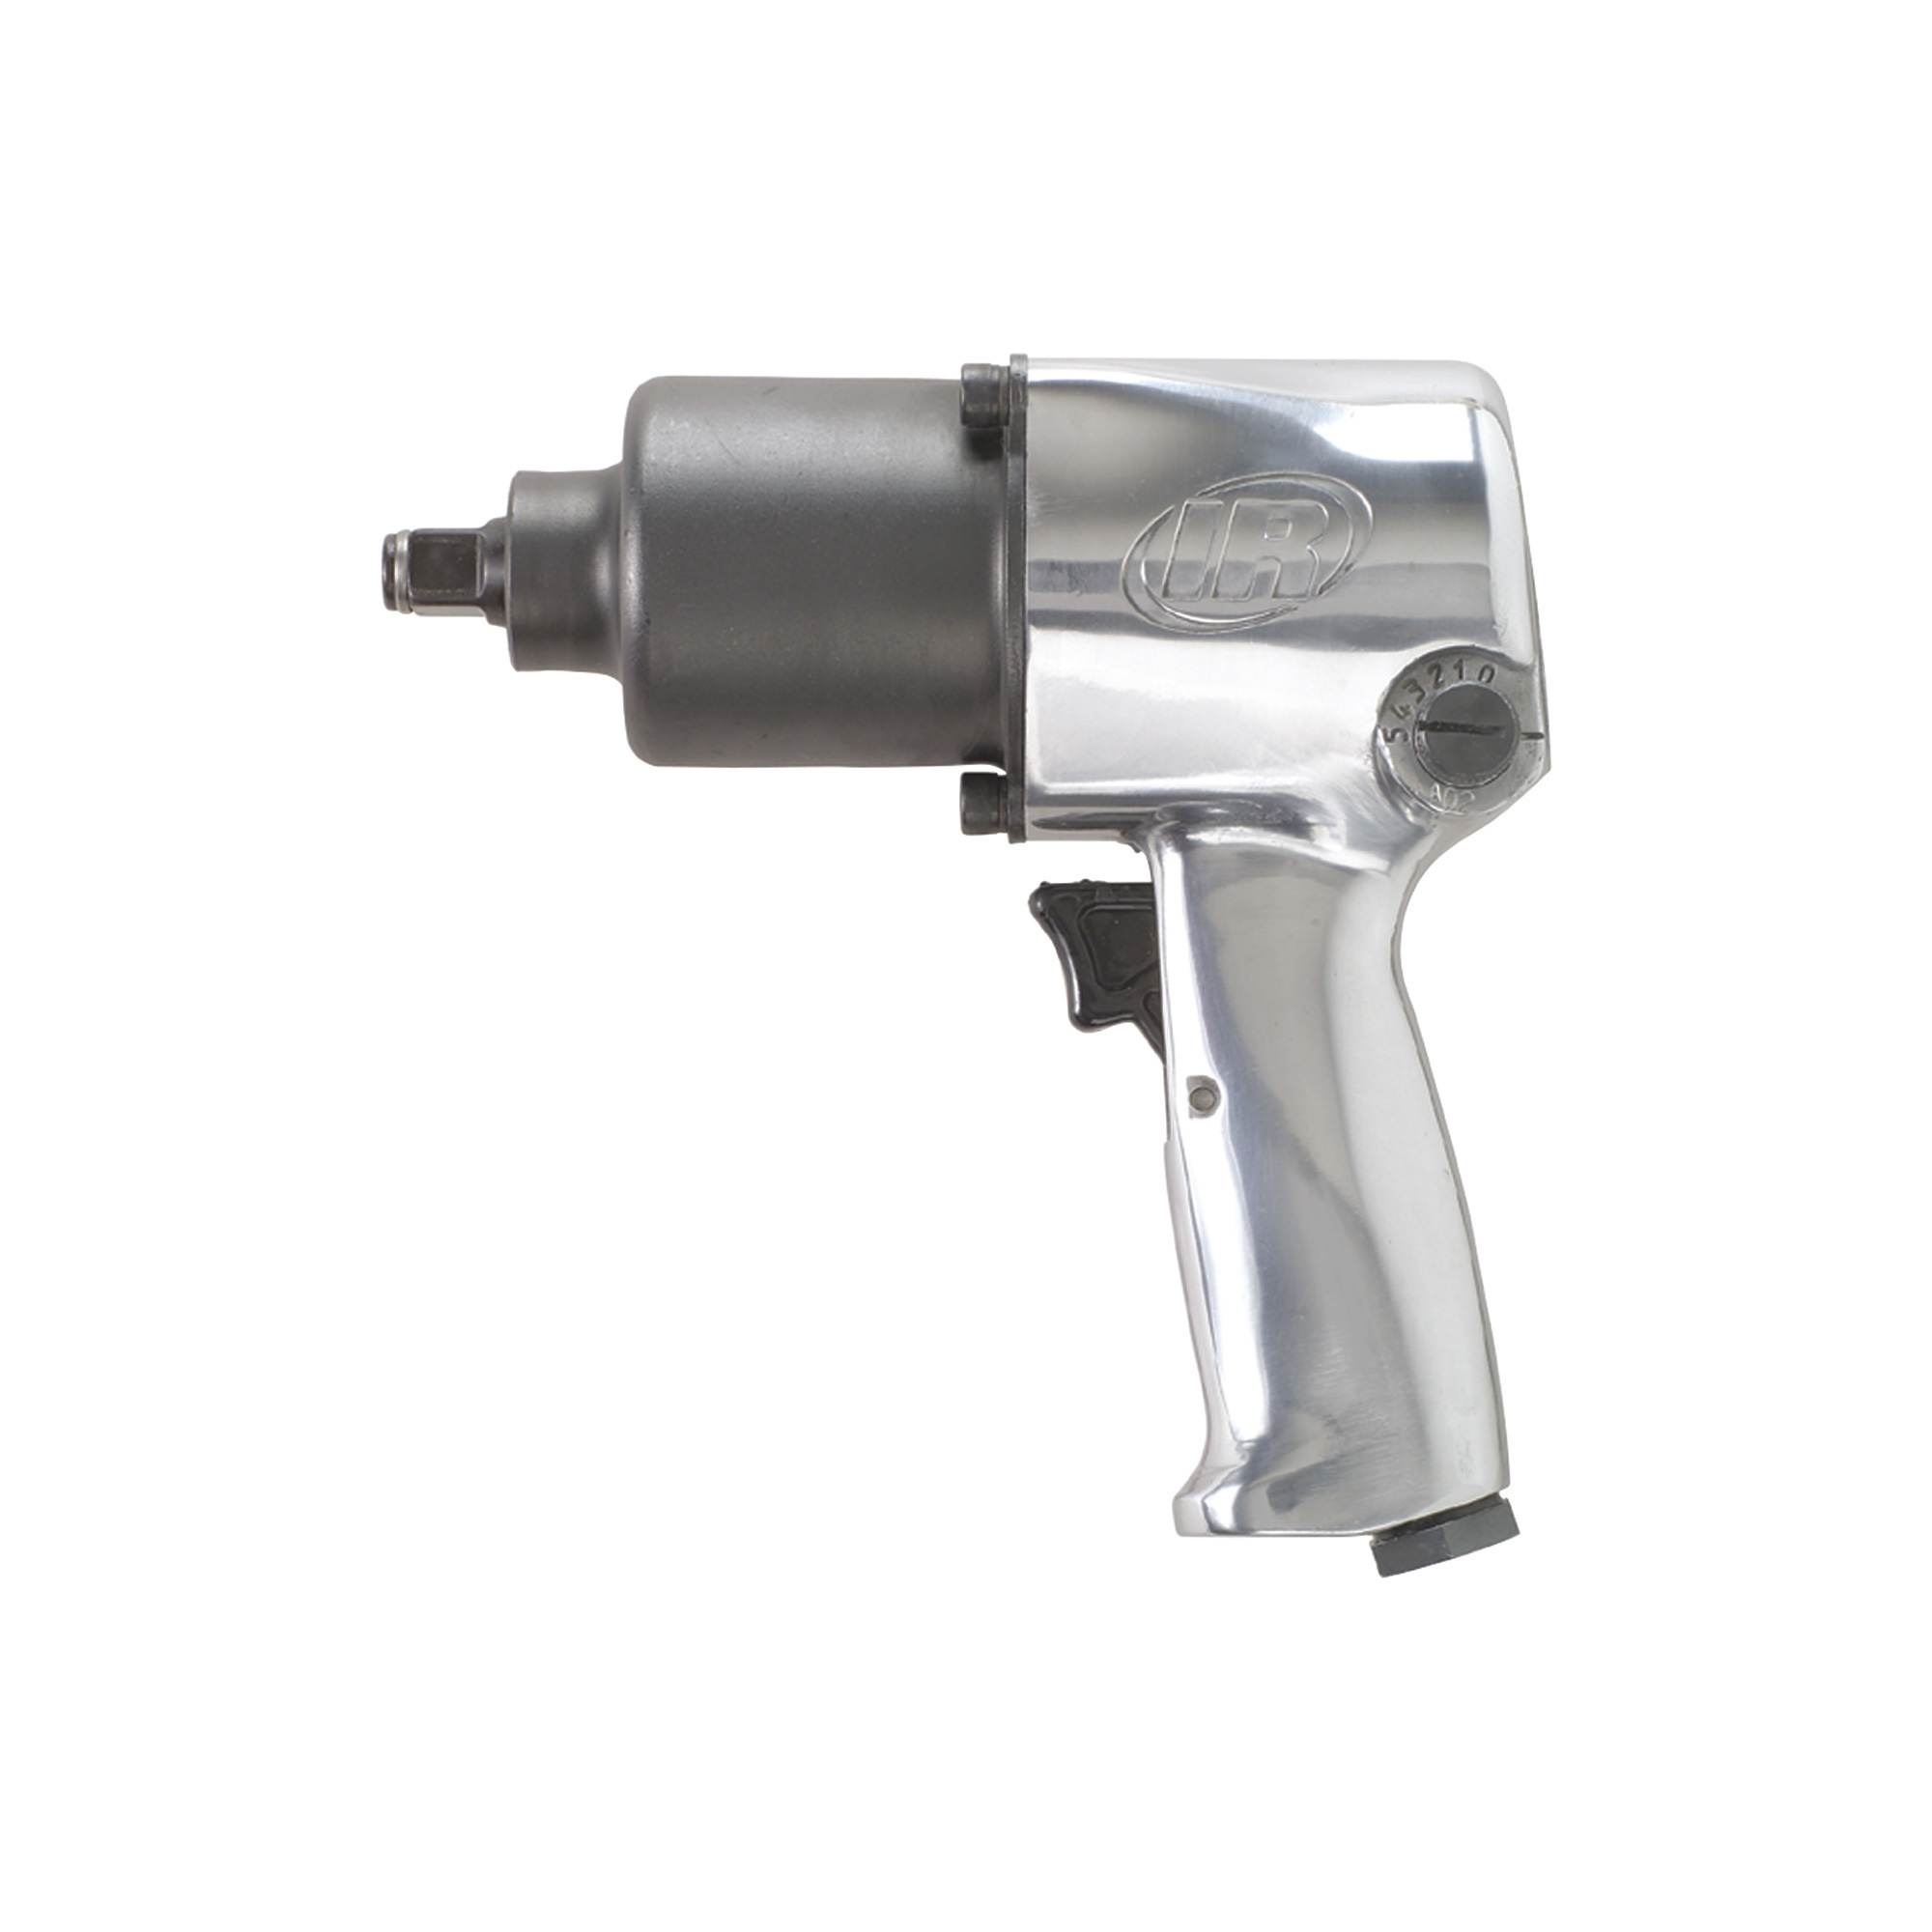 Ingersoll Rand Air Impact Wrench, 1/2Inch Drive, 4.2 CFM, 600 Ft./Lbs. Torque, Model 231C